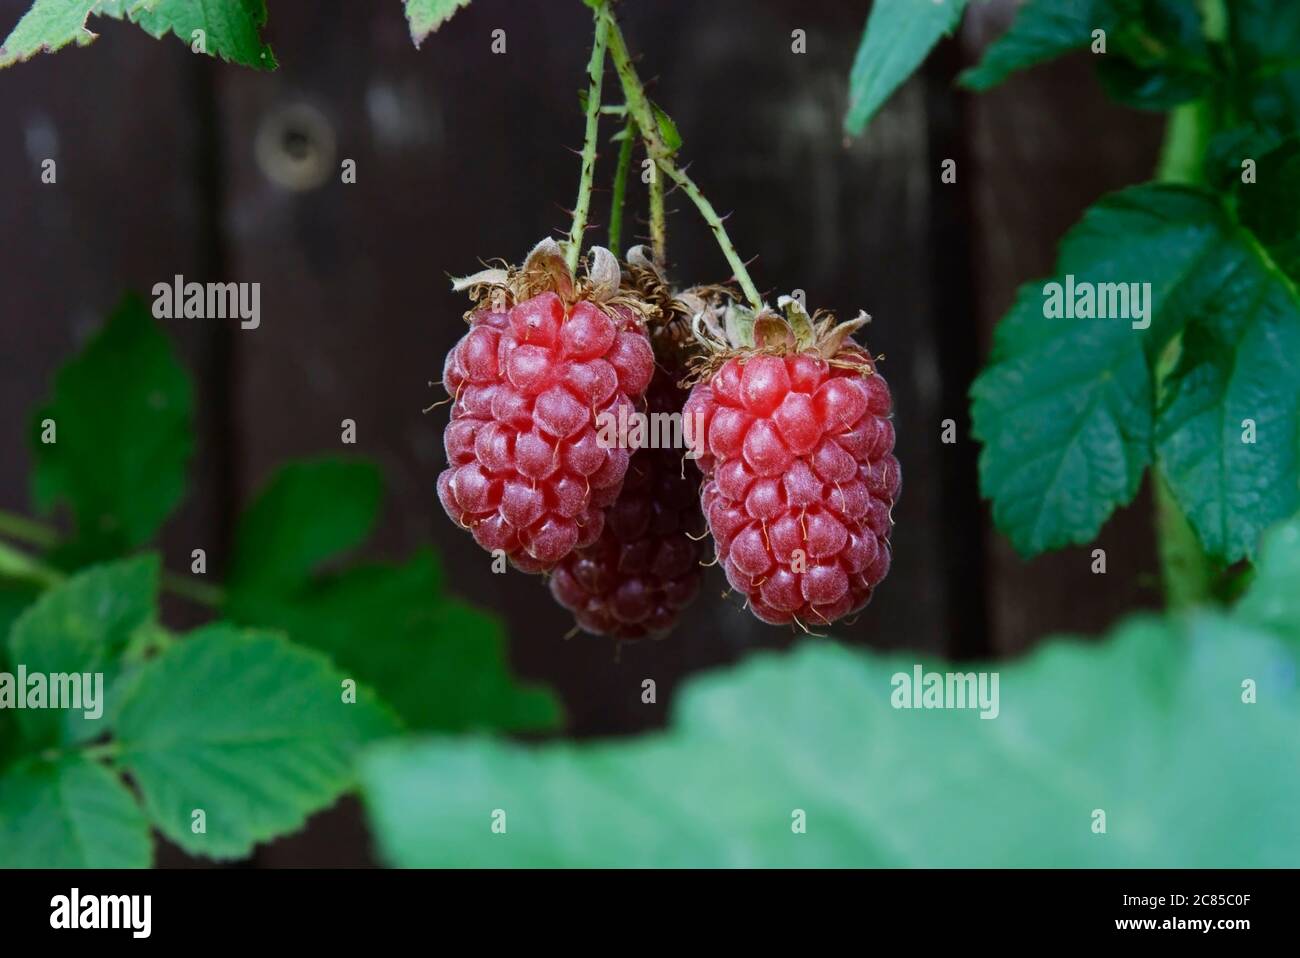 fruits of tayberries in close up - three ripe red fruits on a blurred background Stock Photo